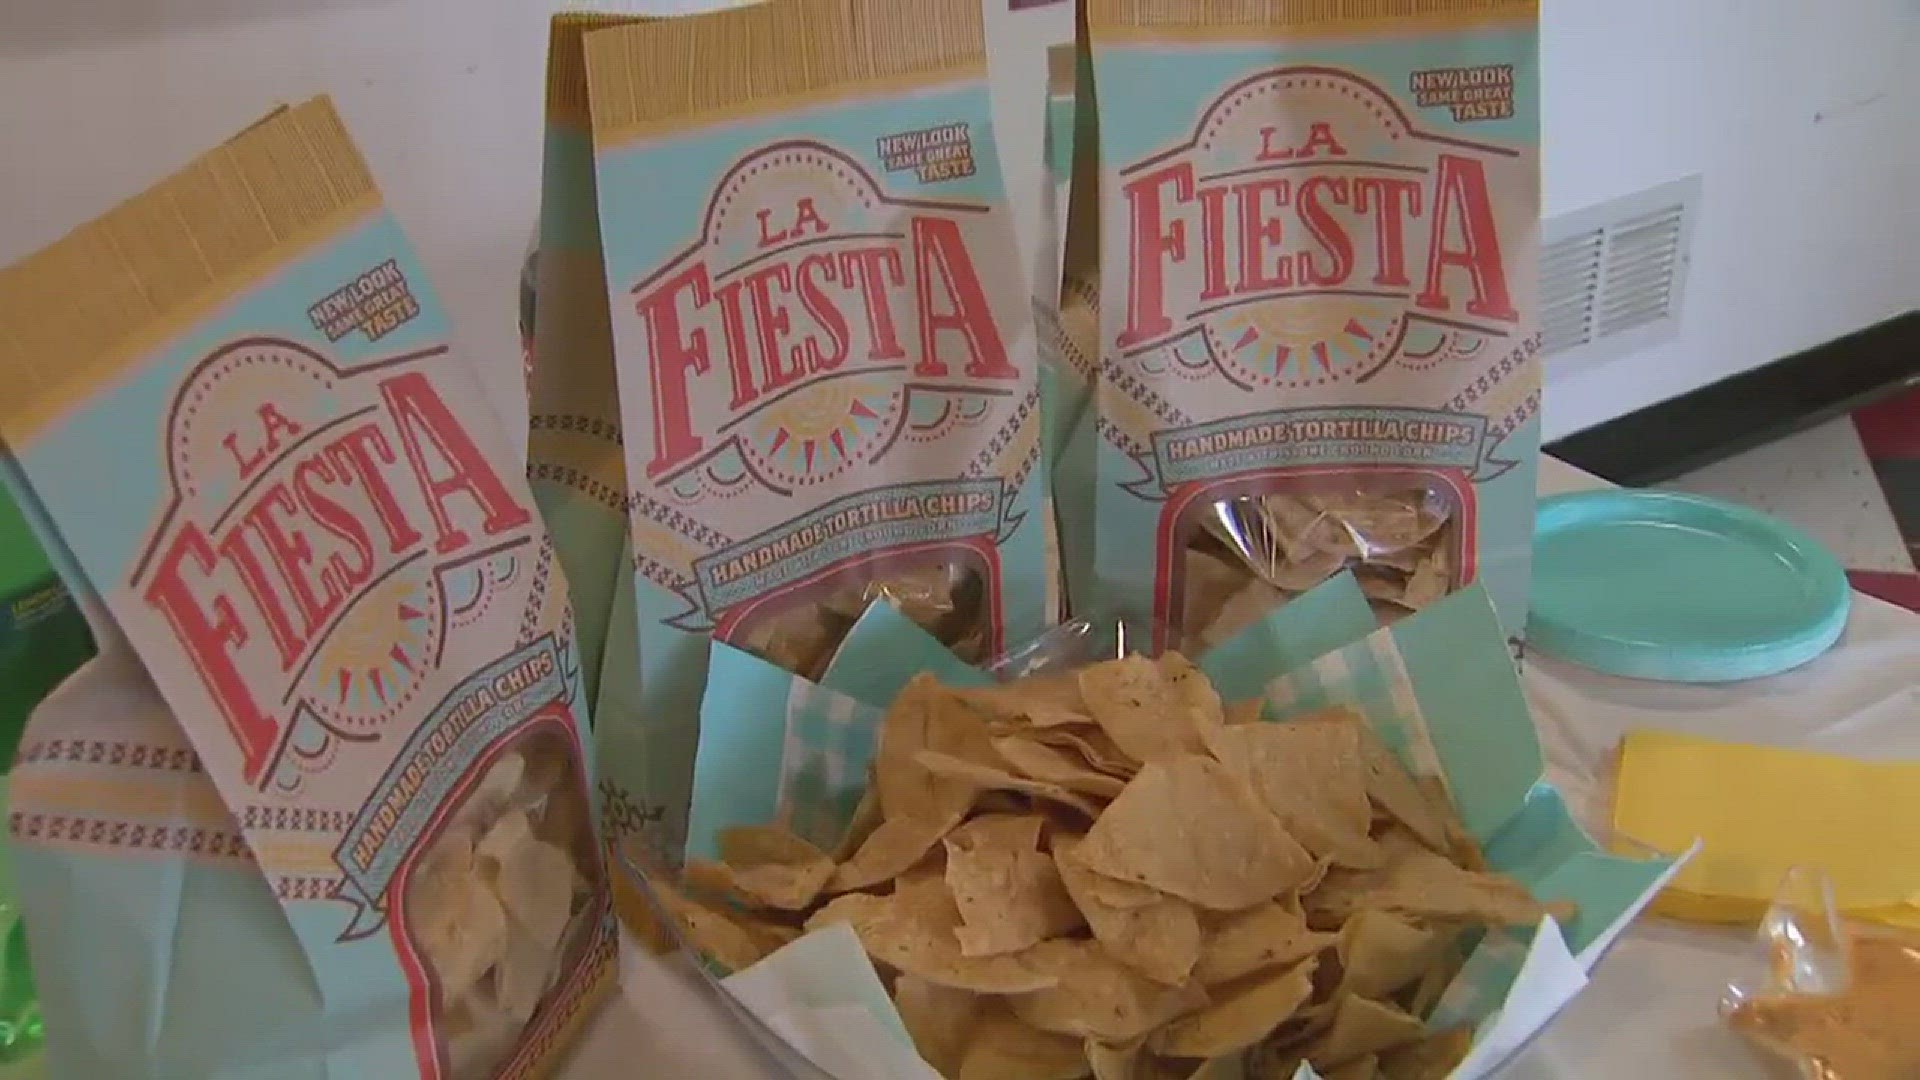 From the kitchen at a small restaurant in Hart, to a production facility in Ludington: The La Fiesta Chip Company.